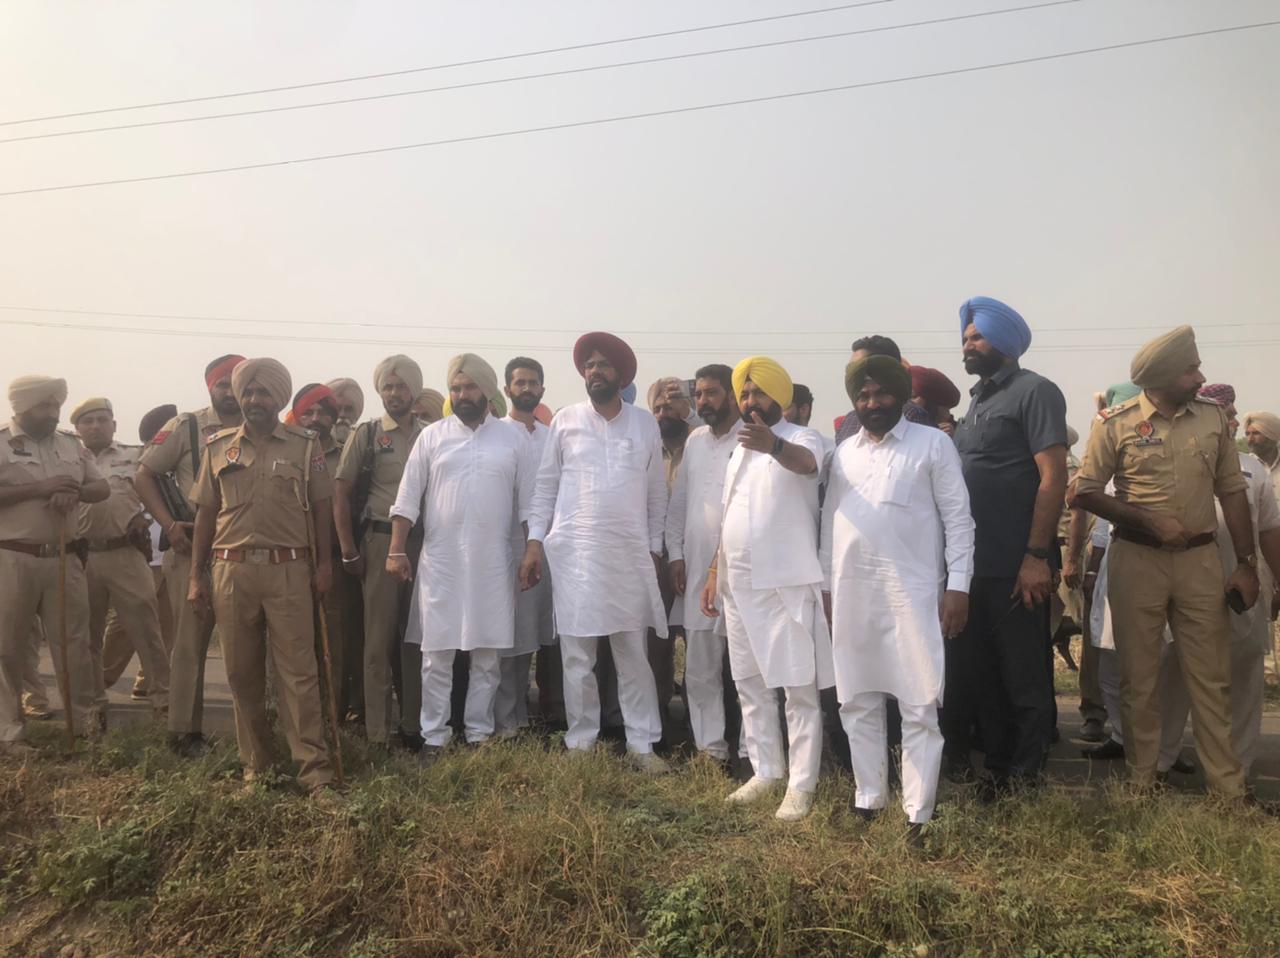 126 acres of village common land freed of encroachments in Ludhiana